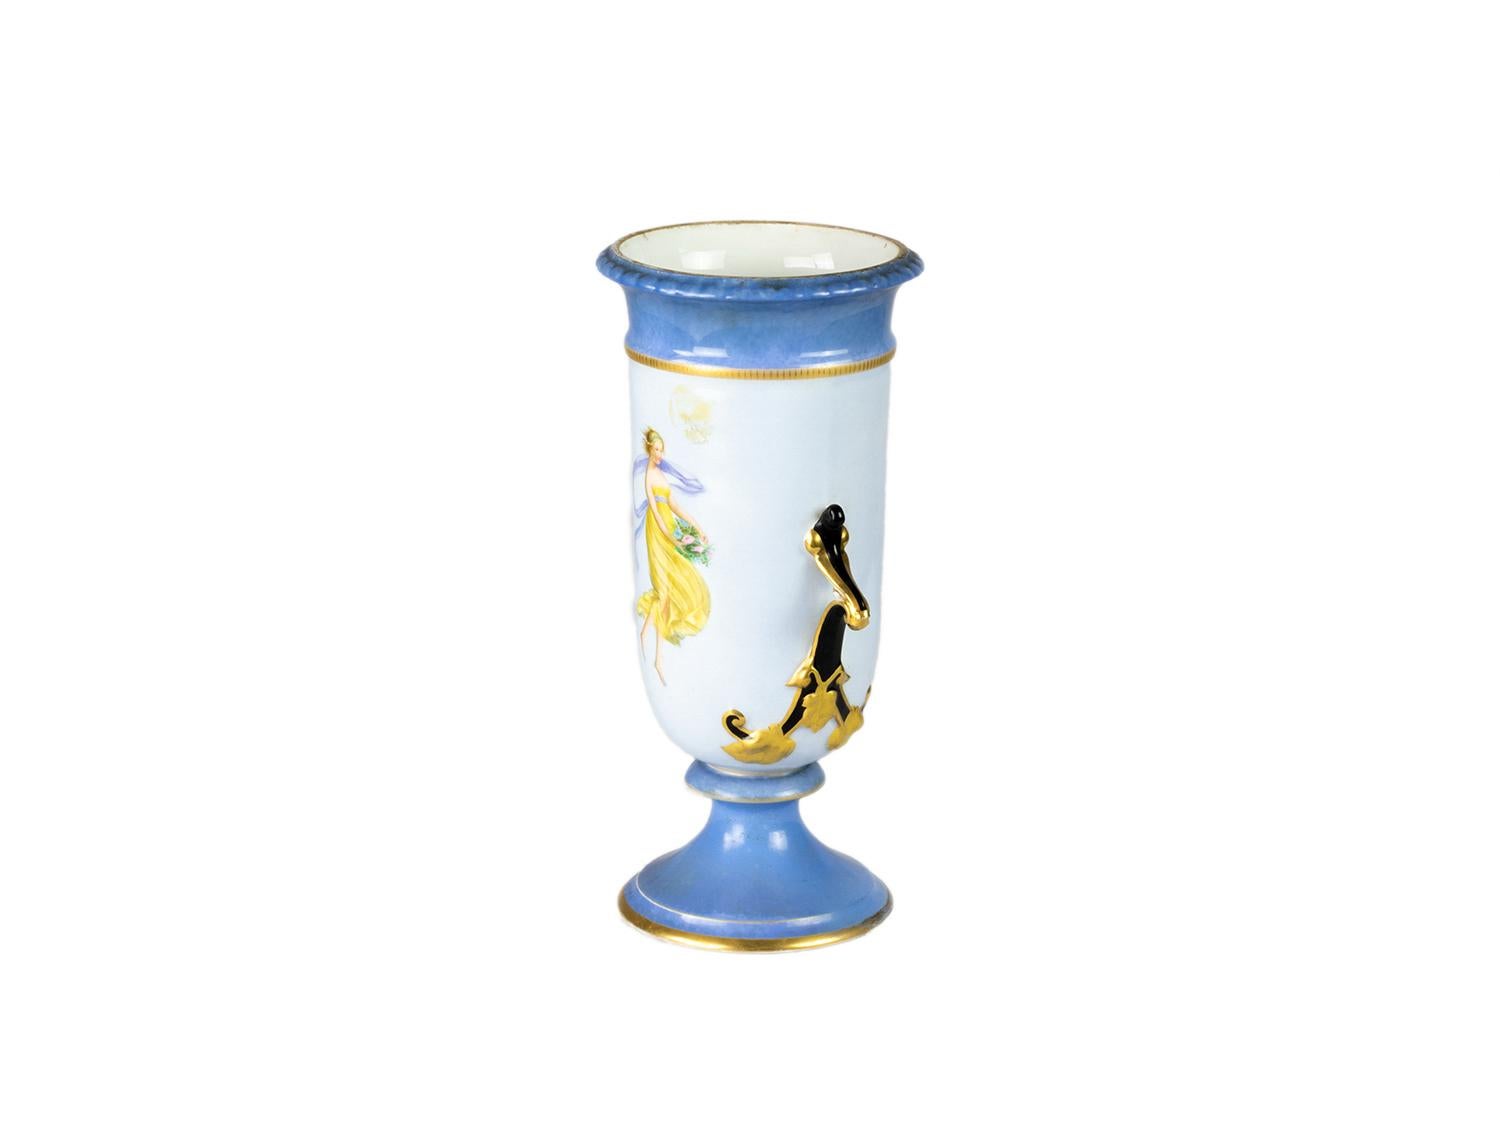 This magnificent Napoleon III porcelain vase showcases a stunning royal cobalt blue hue, adorned with a timeless yellow dress costume with a Nast mark.